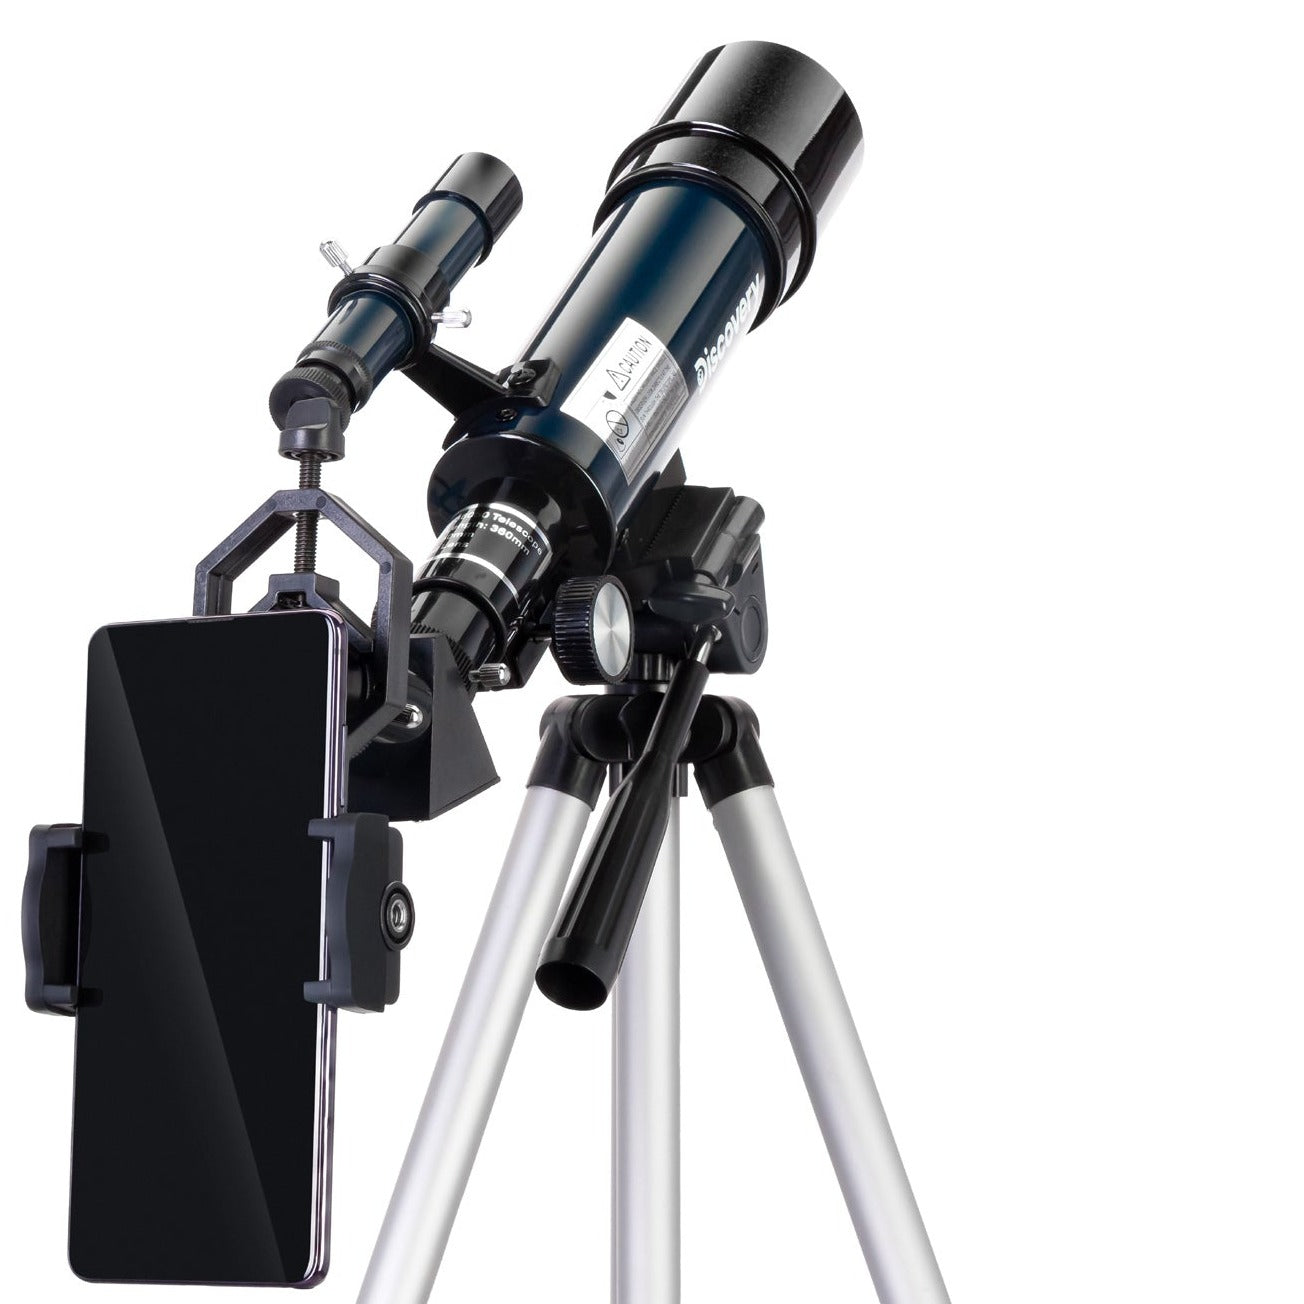 Discovery Sky Trip ST50 Telescope with Book